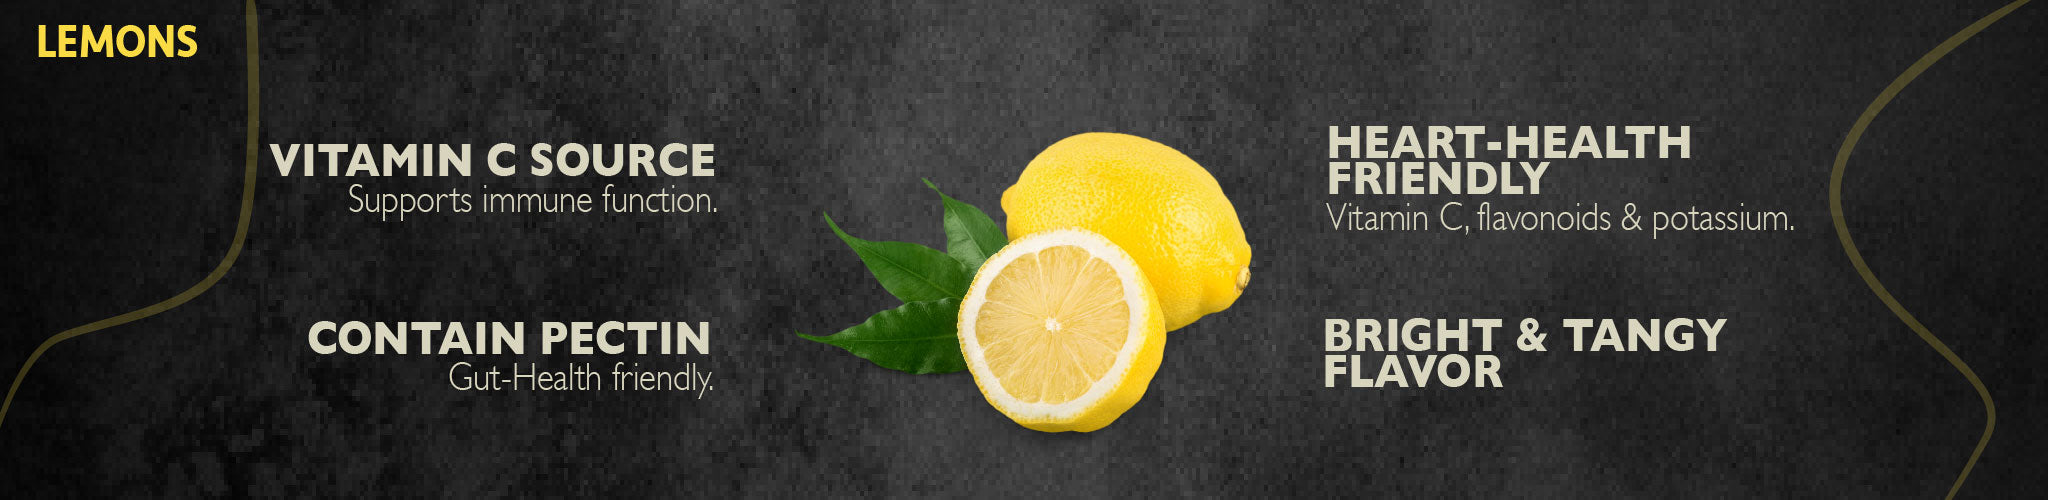 Lemons grown and harvested in Sicily, Italy